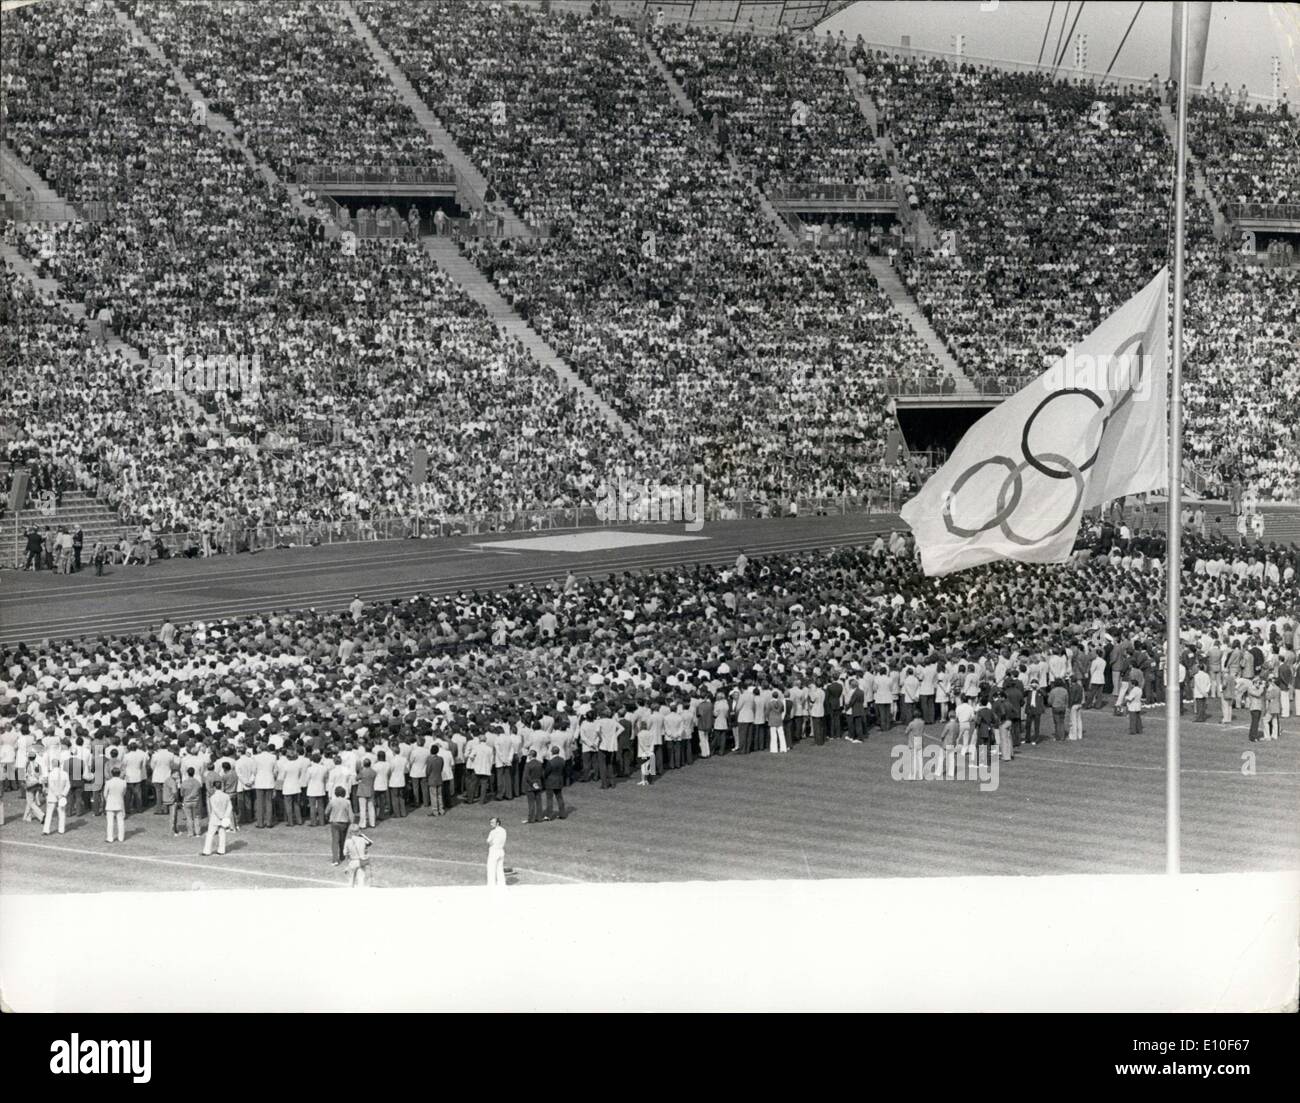 Sep. 06, 1972 - Memorial Service To Dead Israeli Athletes: A memorial Service was held today at the Olympic Stadium in Munich to the Israeli athletes who died in yesterday's massacre at an air base near Munich. Photo Shows General view of the scene in the Olympic Stadium, Munich, during today's memorial service. Stock Photo